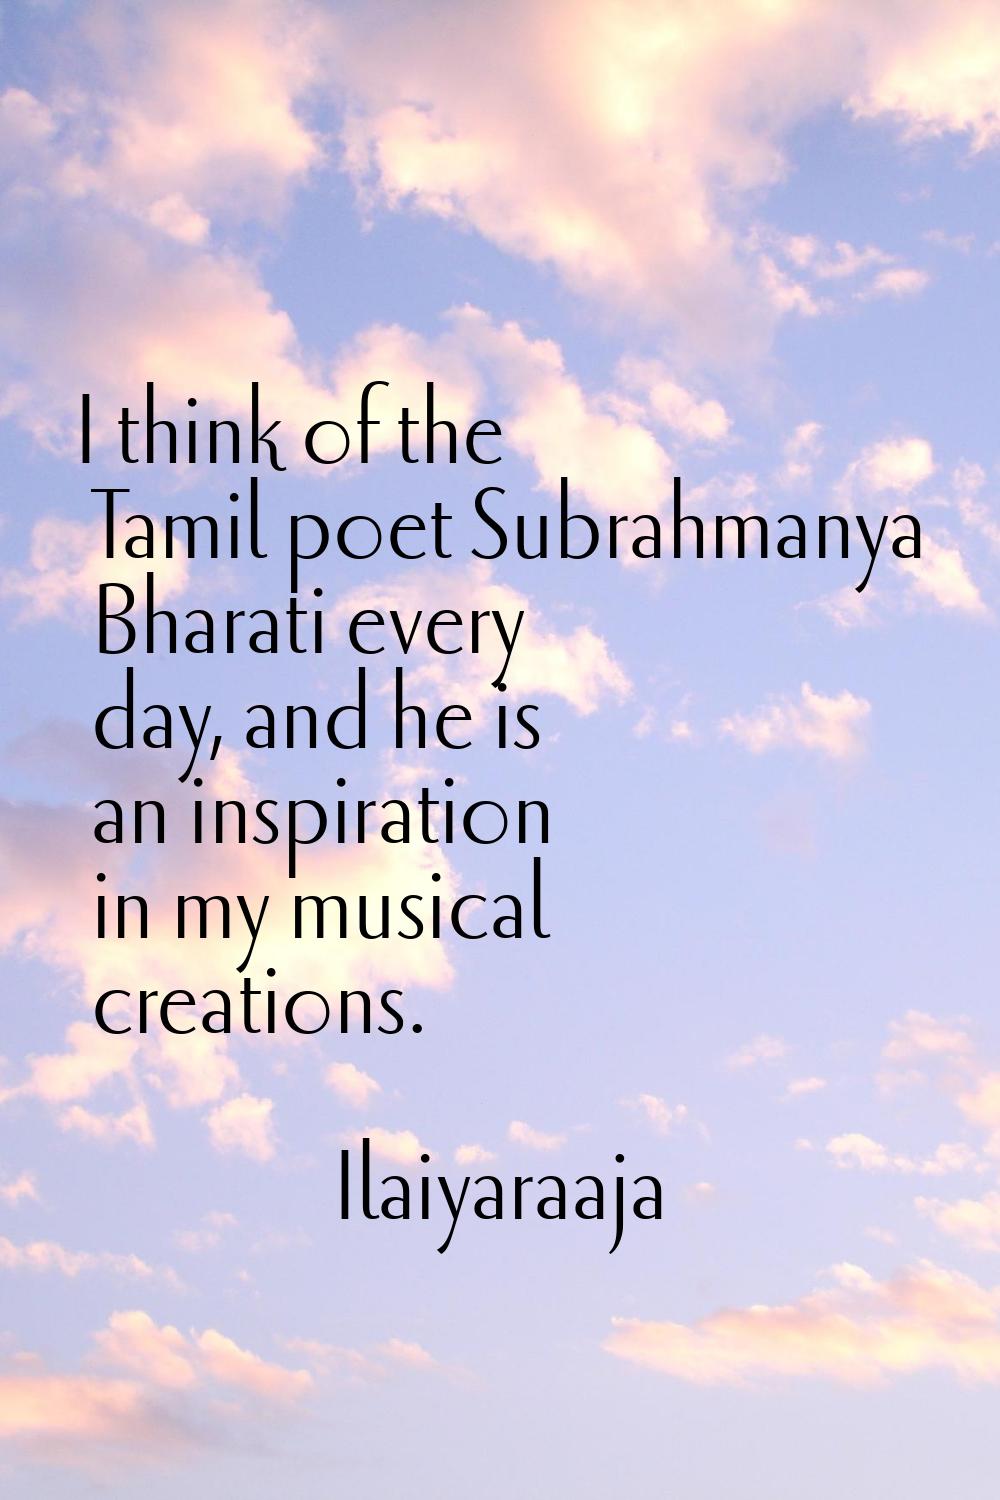 I think of the Tamil poet Subrahmanya Bharati every day, and he is an inspiration in my musical cre